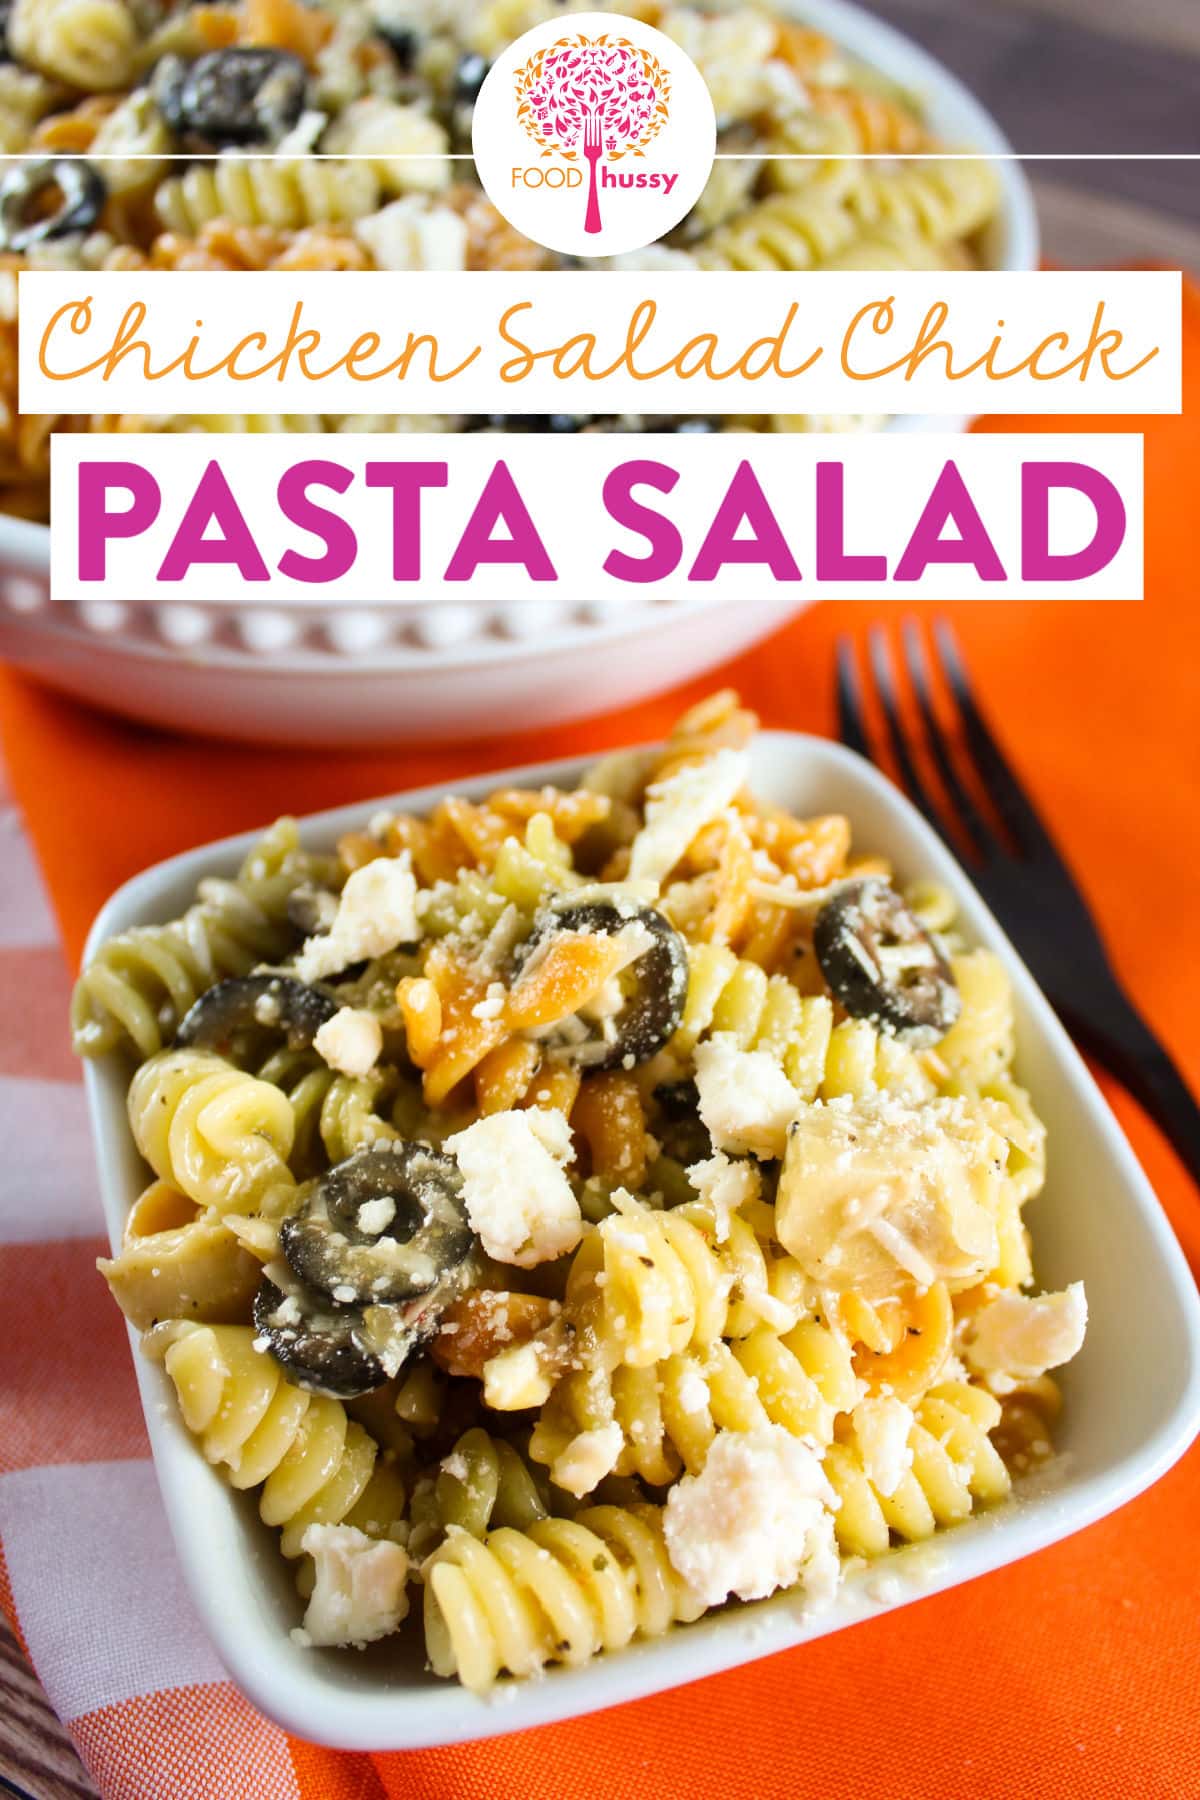 Chicken Salad Chick Pasta Salad is an easy-to-make, potluck-perfect pasta salad! Tri-color rotini pasta tossed with Italian dressing, feta & parmesan cheese, black olives & artichoke hearts. via @foodhussy